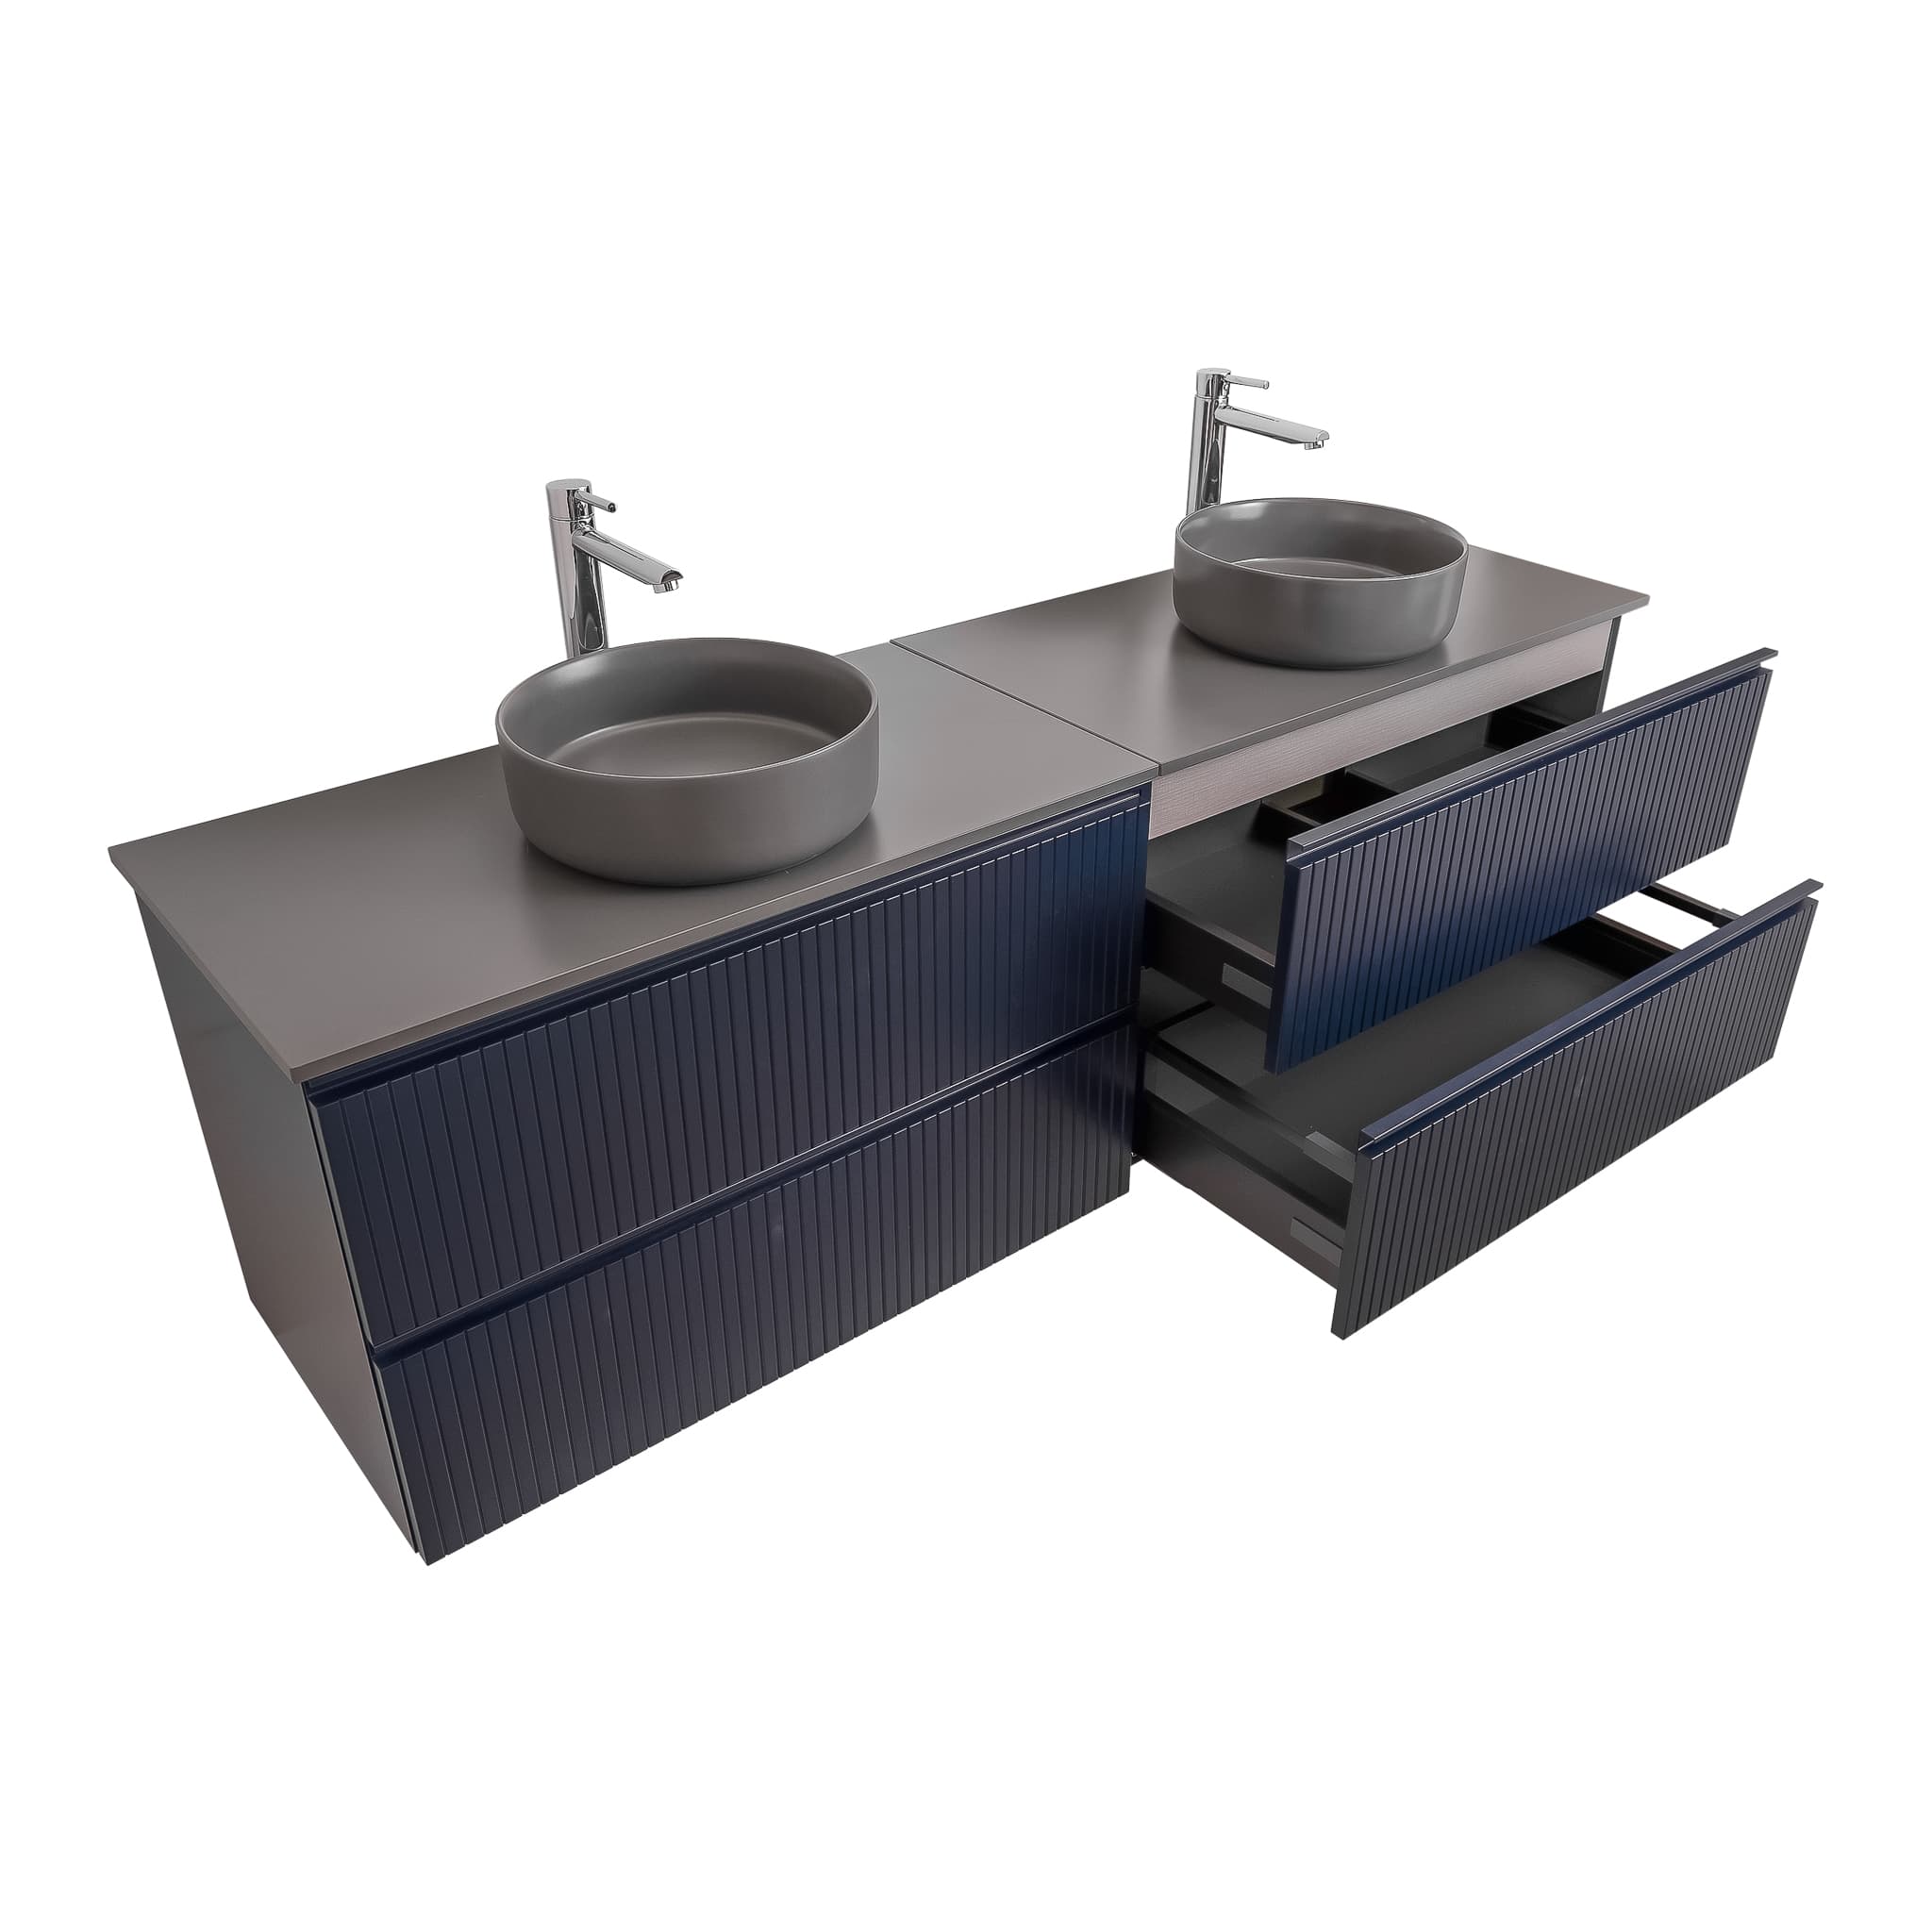 Ares 63 Matte Navy Blue Cabinet, Ares Grey Ceniza Top And Two Ares Grey Ceniza Ceramic Basin, Wall Mounted Modern Vanity Set